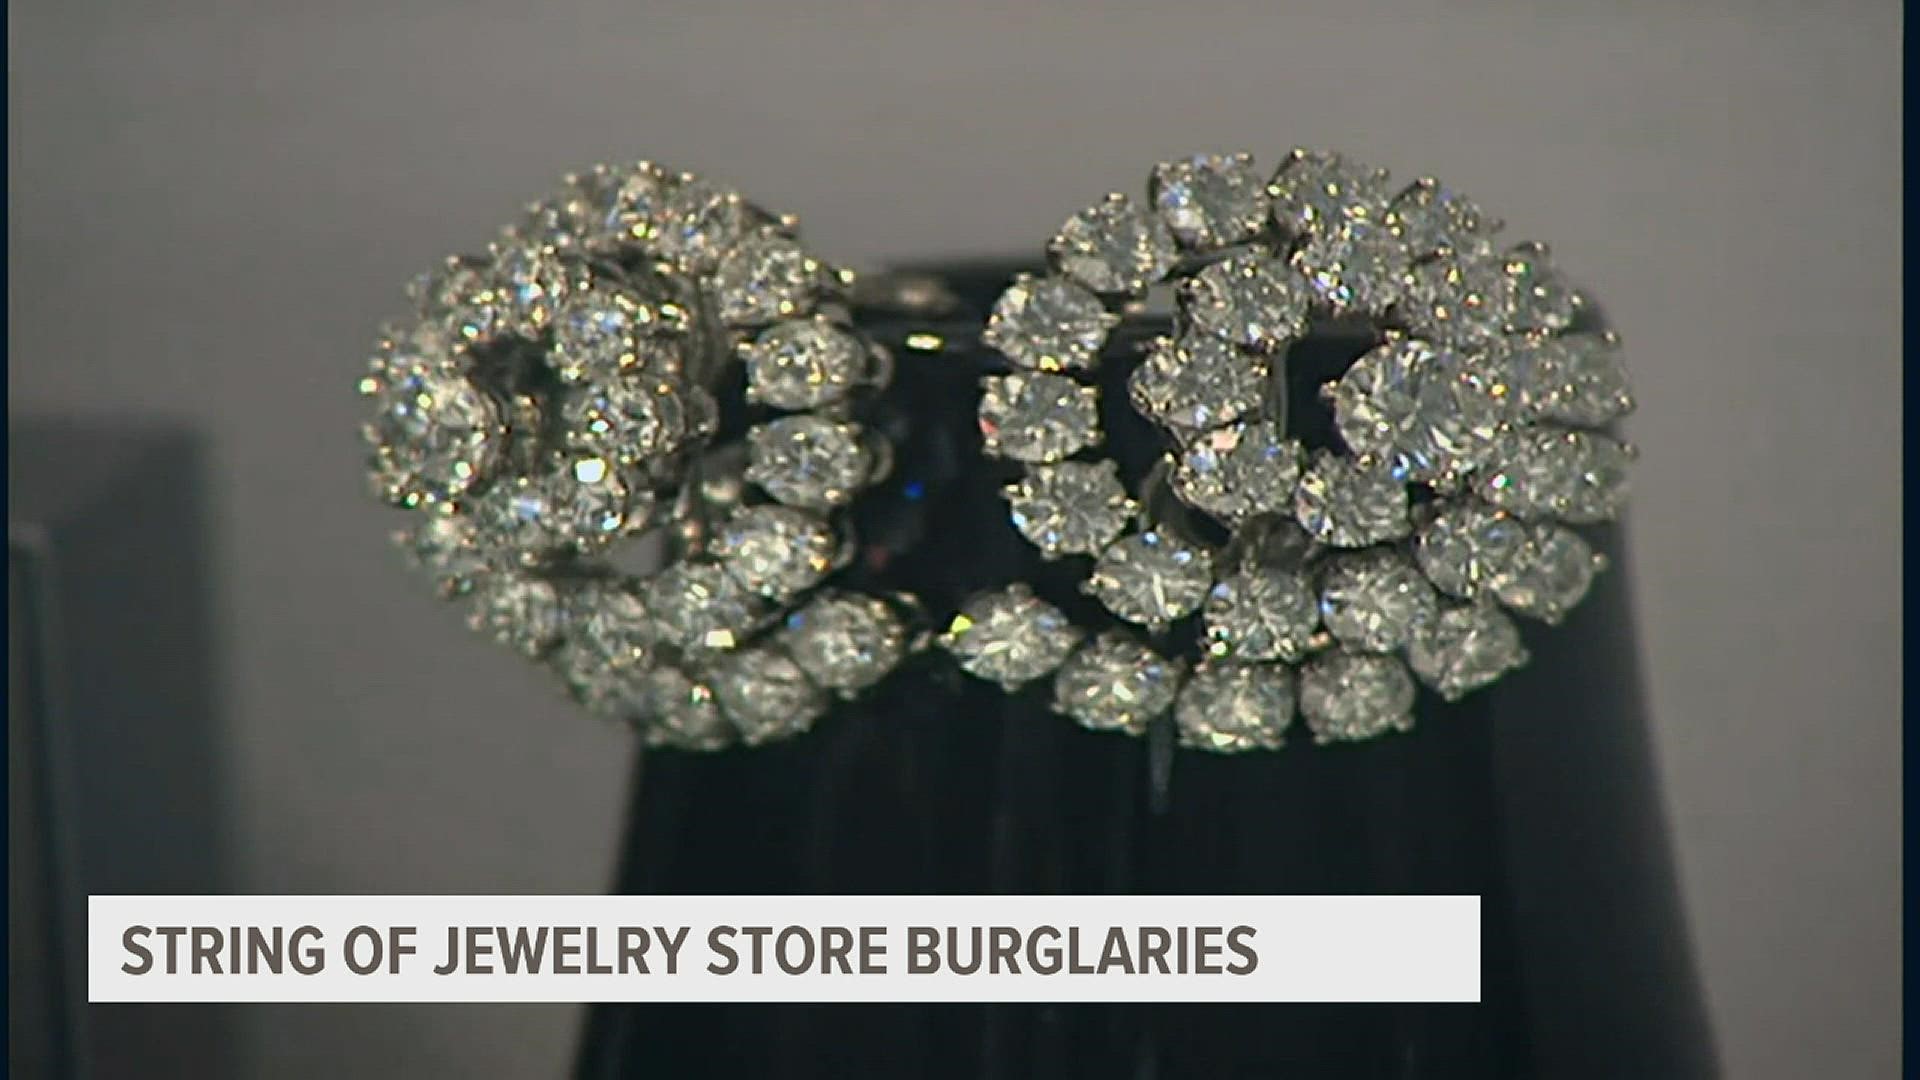 Jewelry store owners are growing concerned over a string of burglaries that happened across south central Pennsylvania in the last month and a half.